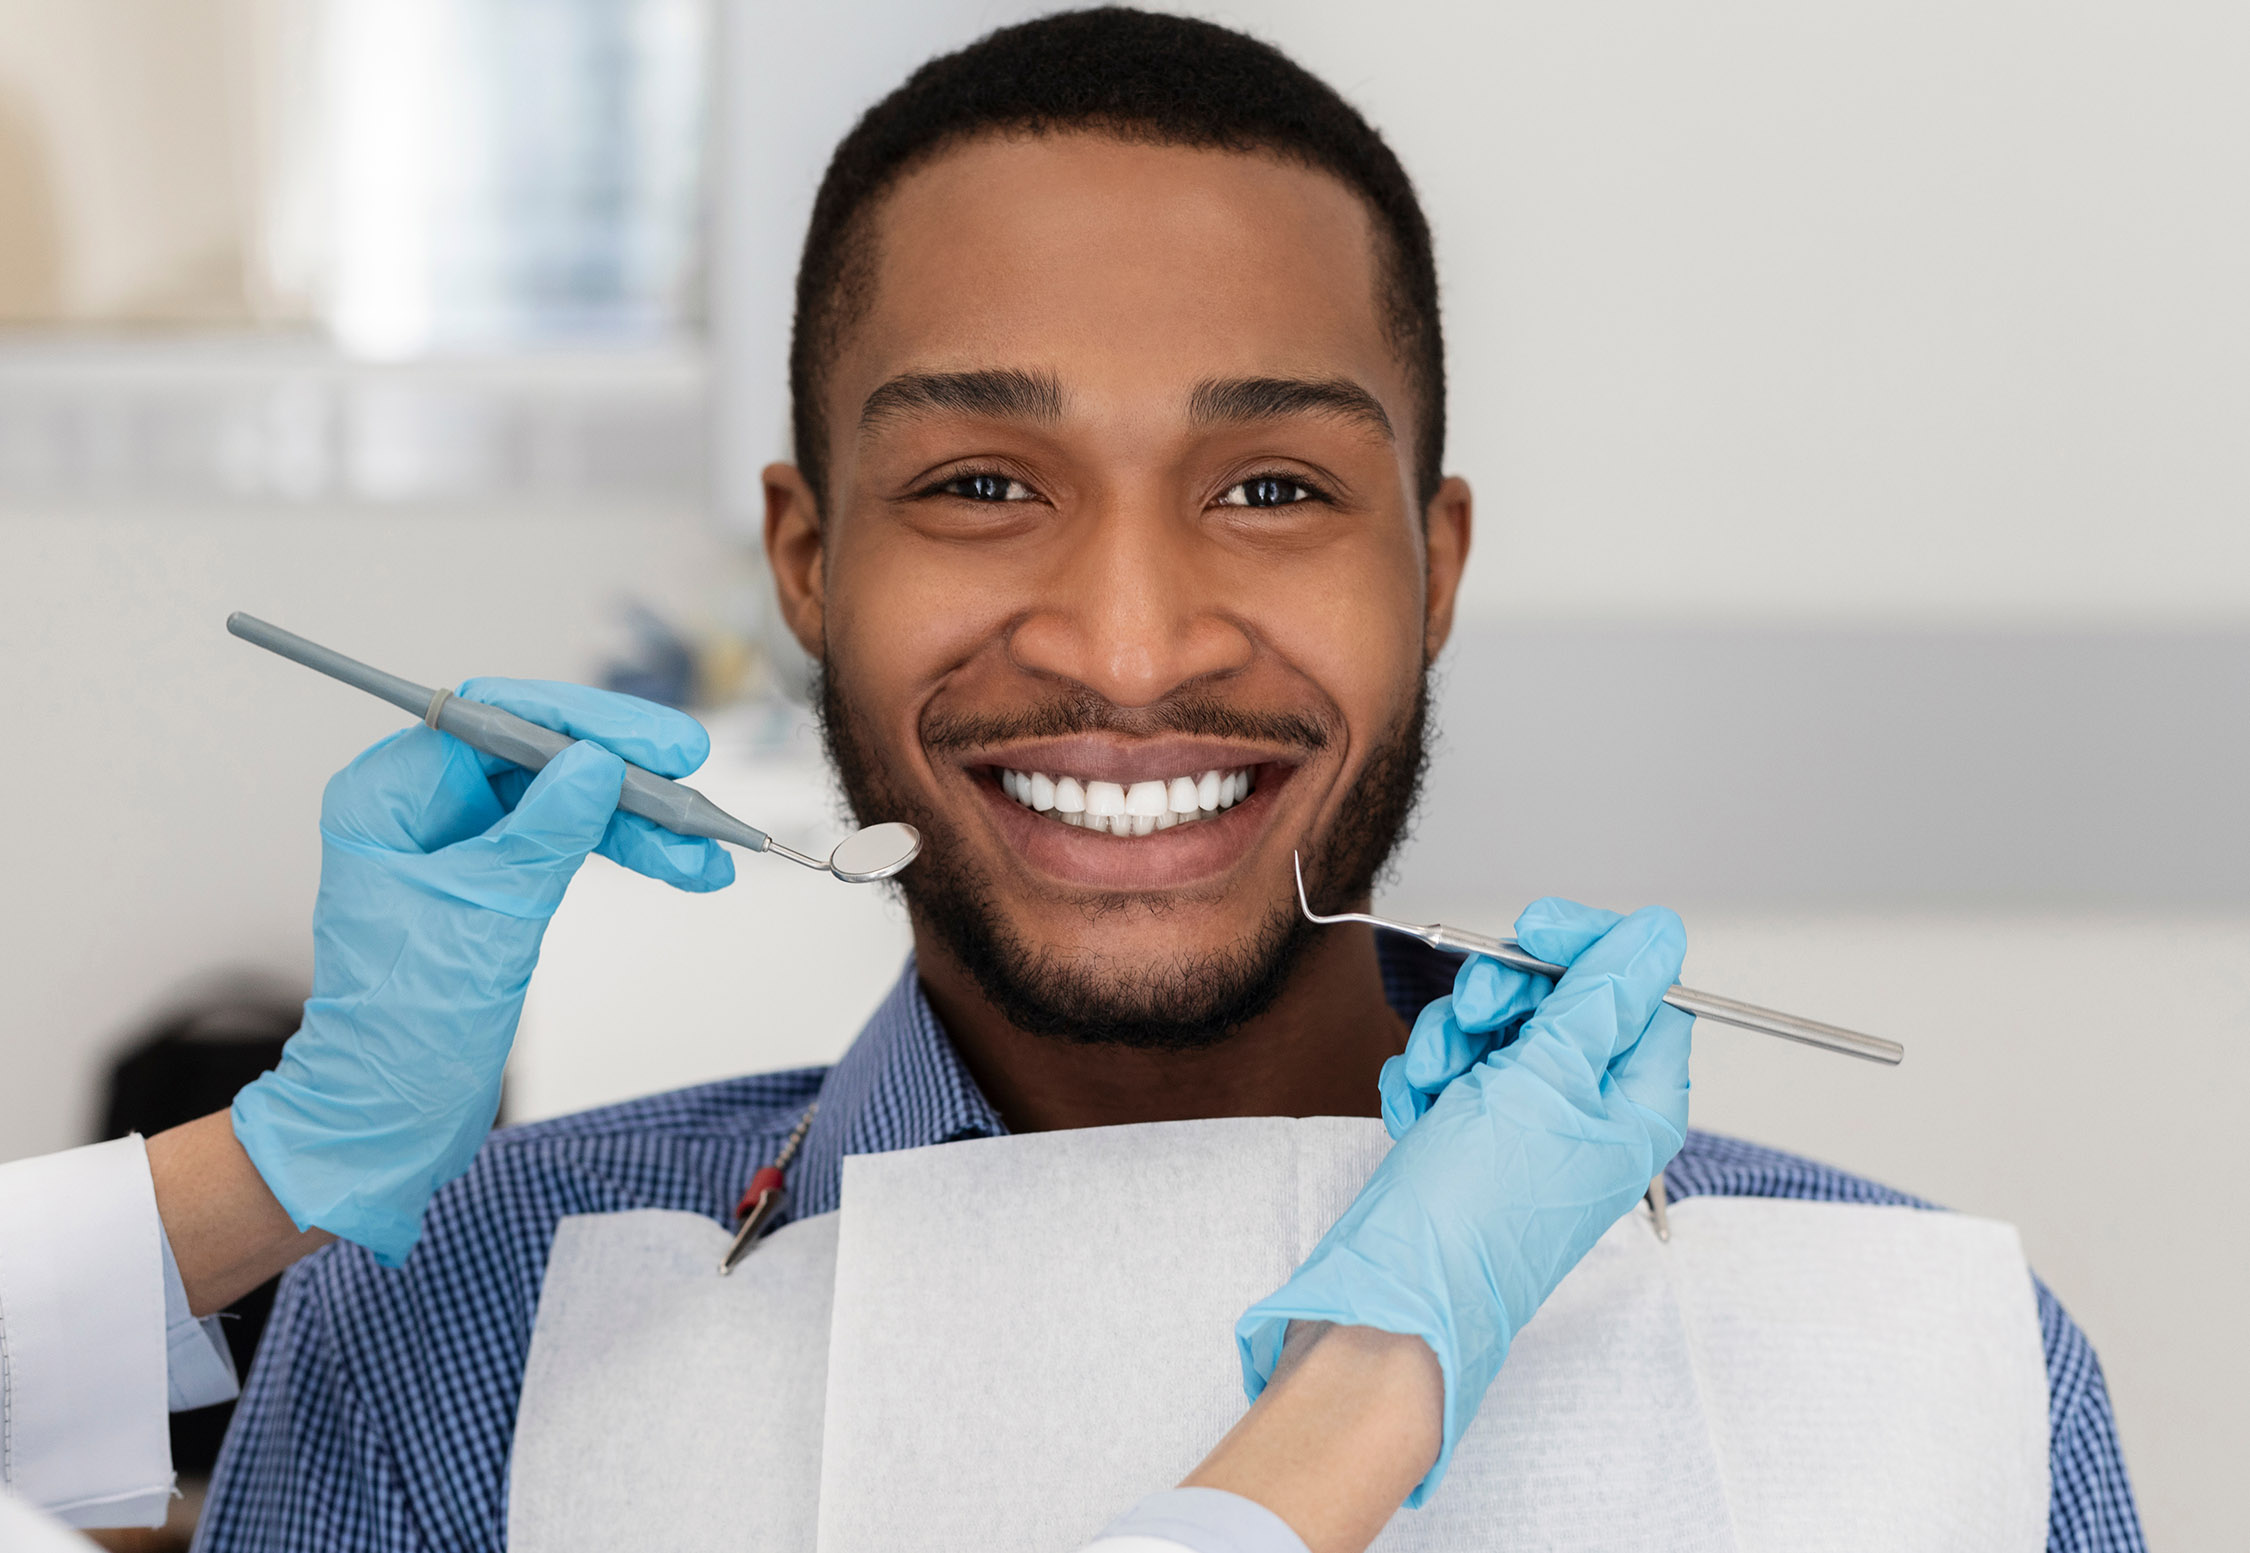 What Side Effects Does Teeth Whitening Have?